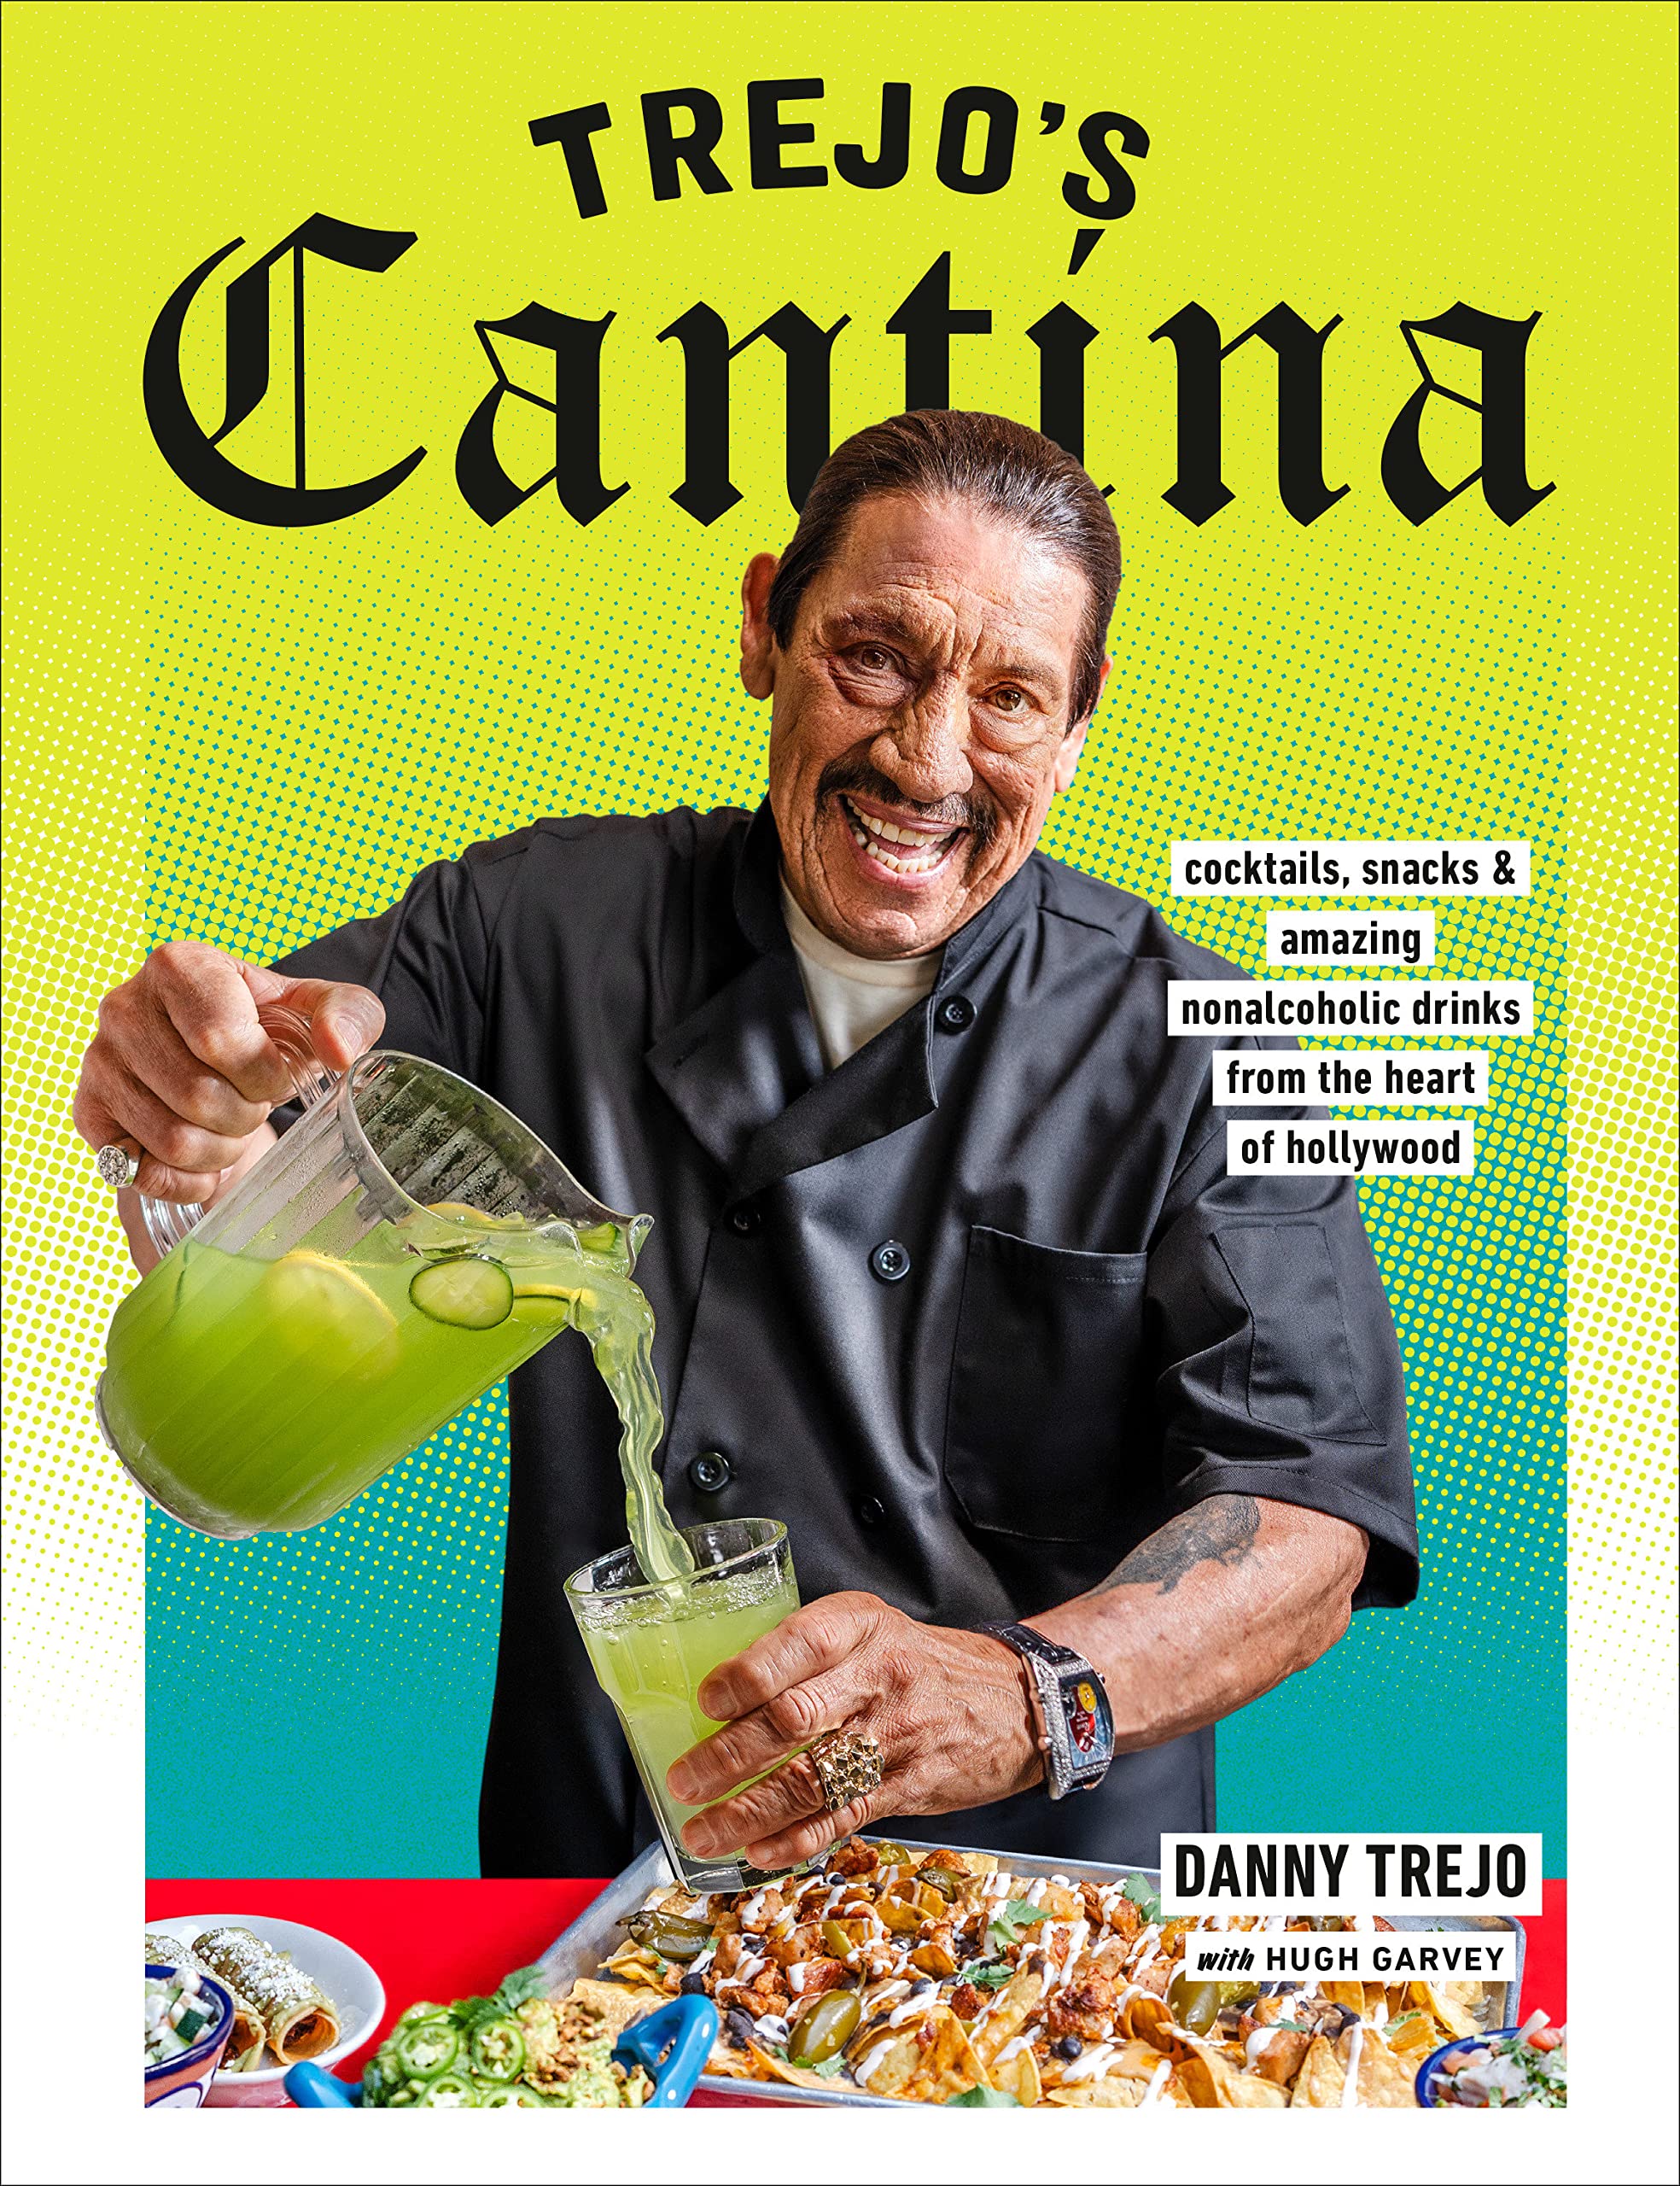 Trejo's Cantina: Cocktails, Snacks & Amazing Non-Alcoholic Drinks from the Heart of Hollywood Hardcover